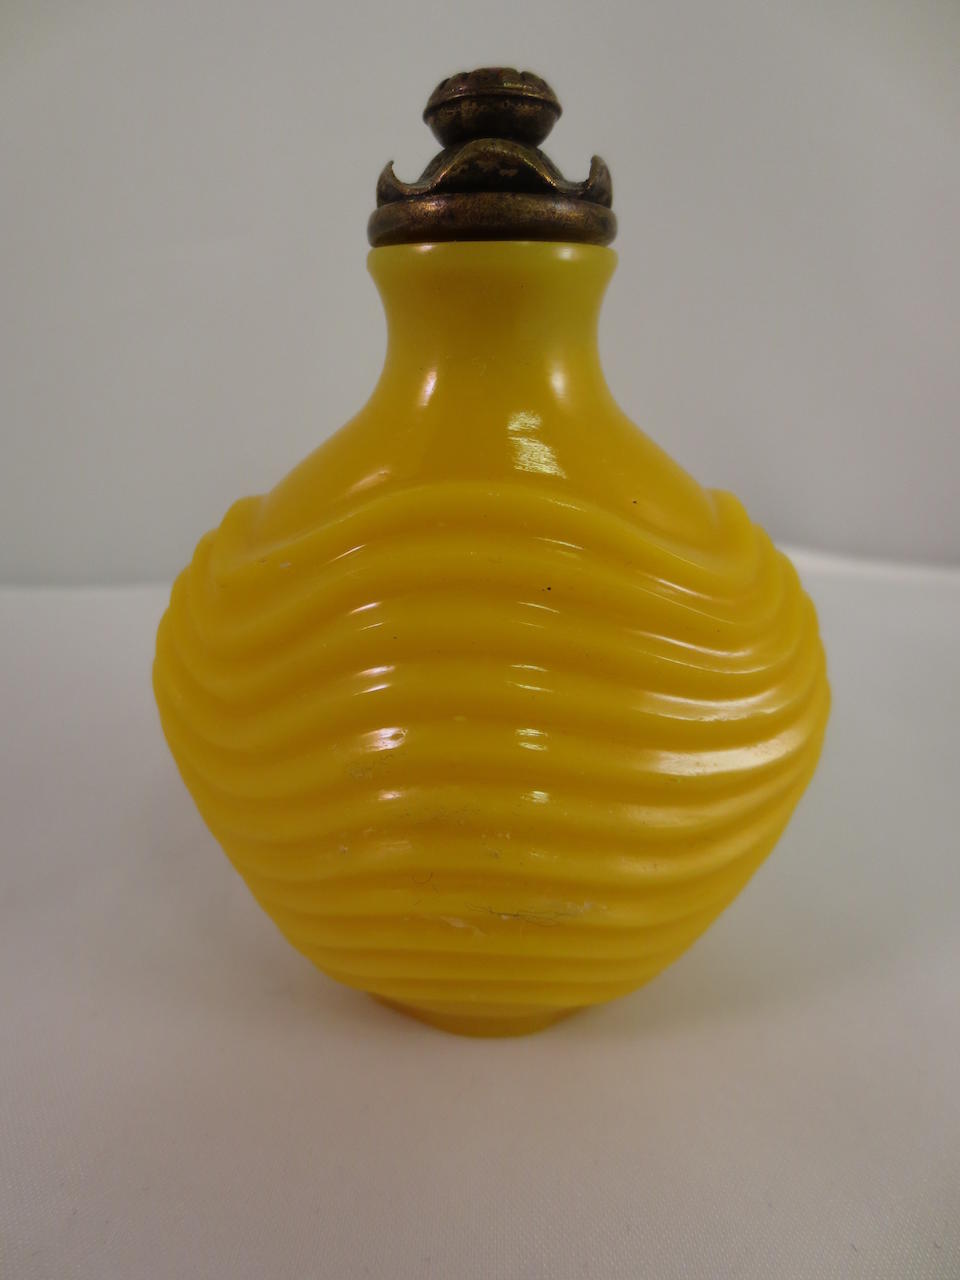 A rare yellow glass snuff bottle with a waving rib design Imperial, Palace Workshops, Beijing, 1750-1840